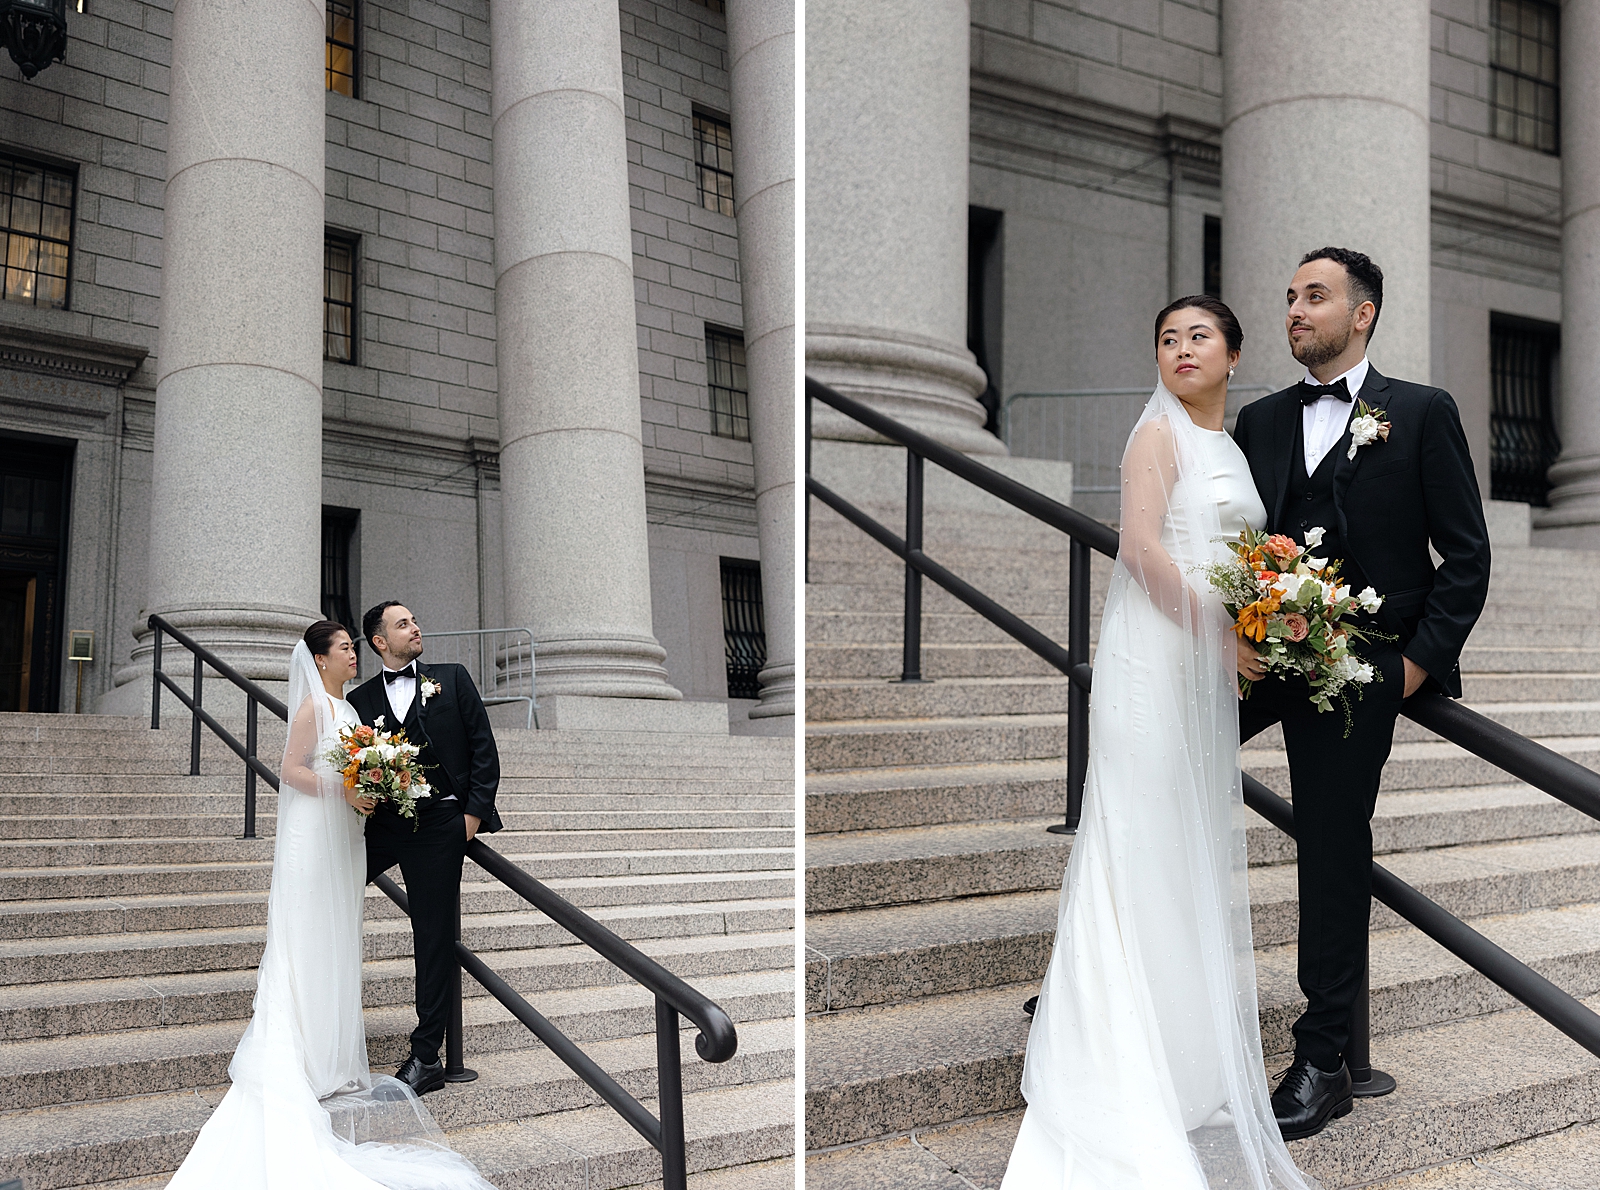 Left photo: Shot of the bride and groom standing on the courthouse steps and staring off into the distance.
Right photo: Full body shot of the bride and groom posing on the courthouse steps. 